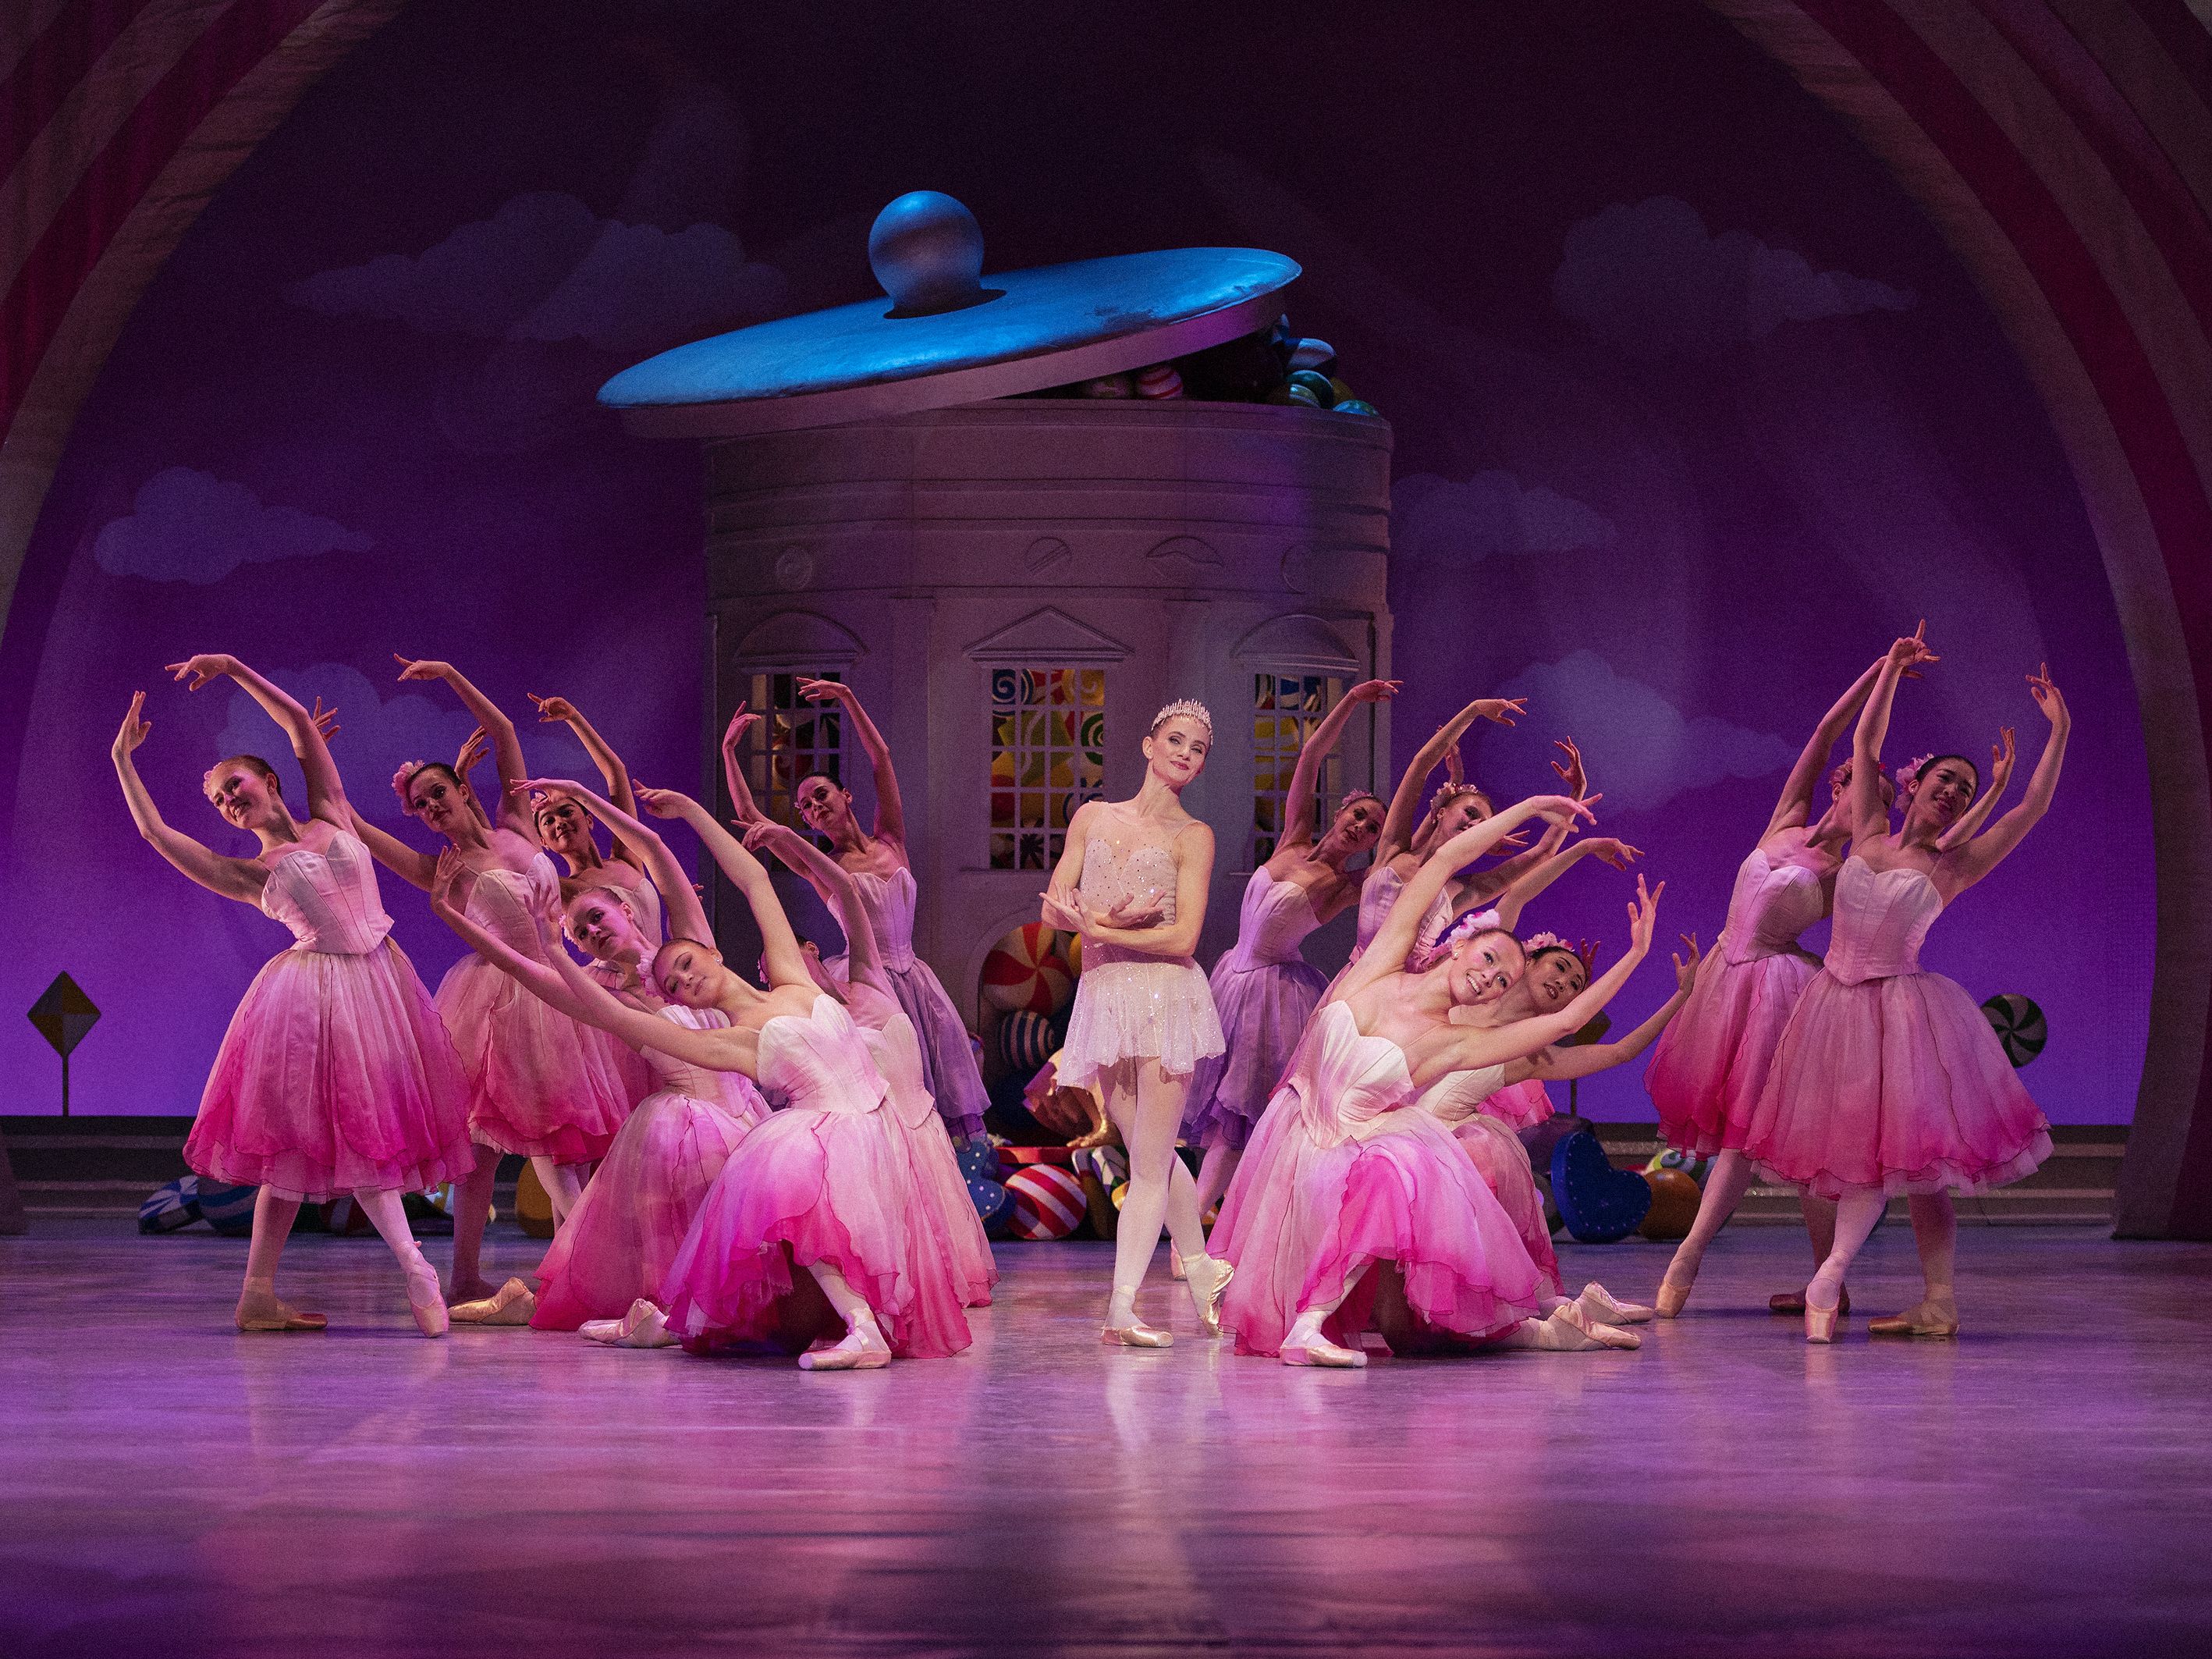 Performance Review: Why ‘The Nutcracker’ is one of the ultimate Christmas magic moments